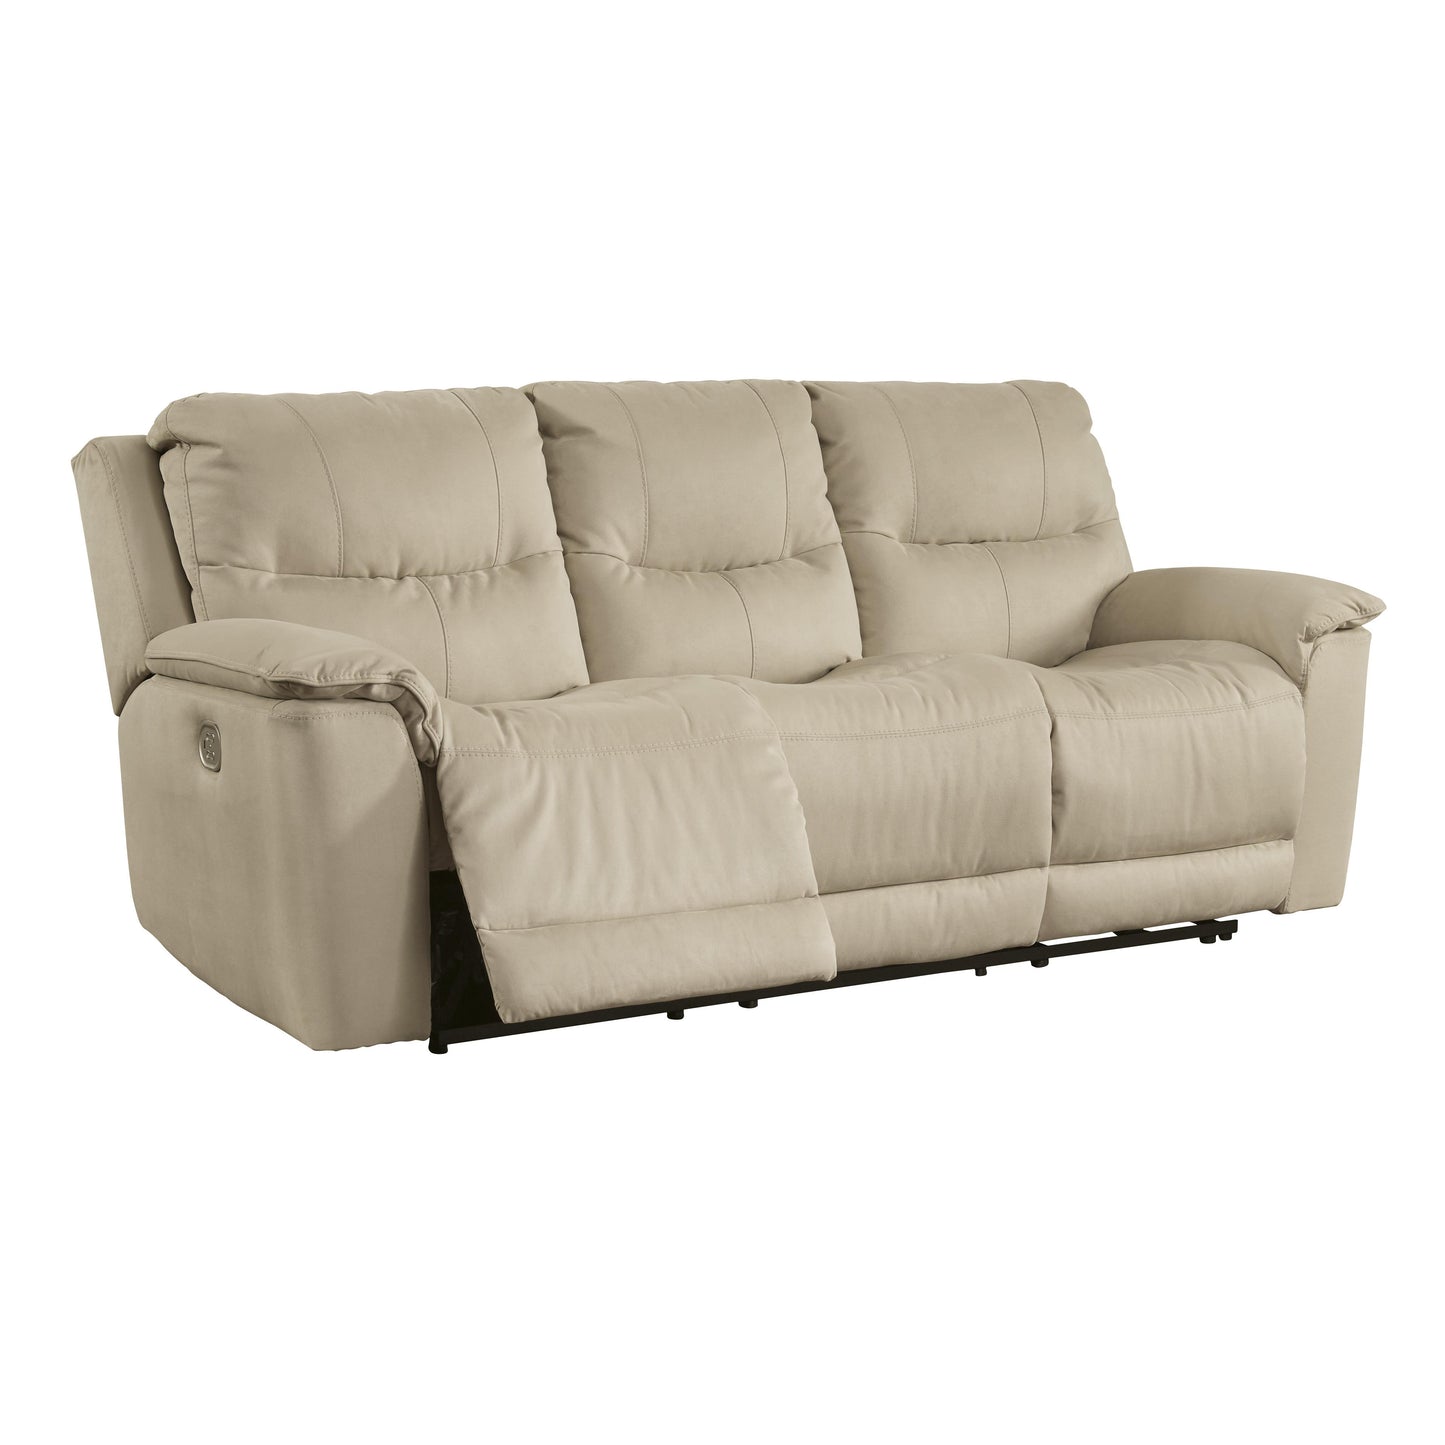 Signature Design by Ashley Next-Gen Gaucho Power Reclining Leather Look Sofa 6080715 IMAGE 2